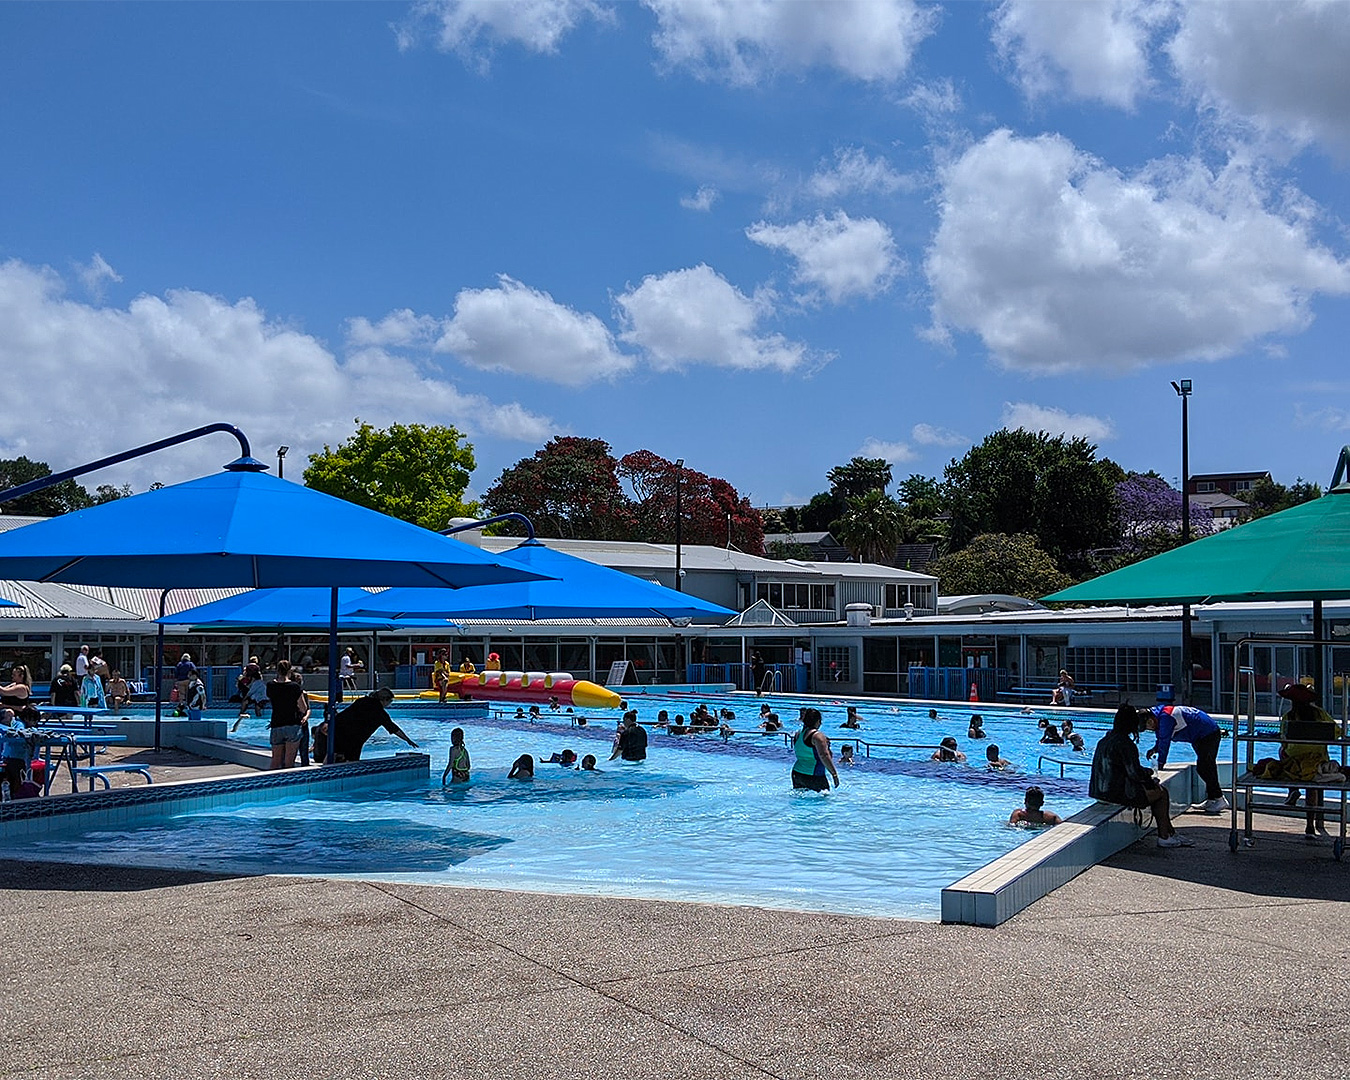 People splash about in the outdoor pool at The Y Lagoon Pool And Leisure Centre.